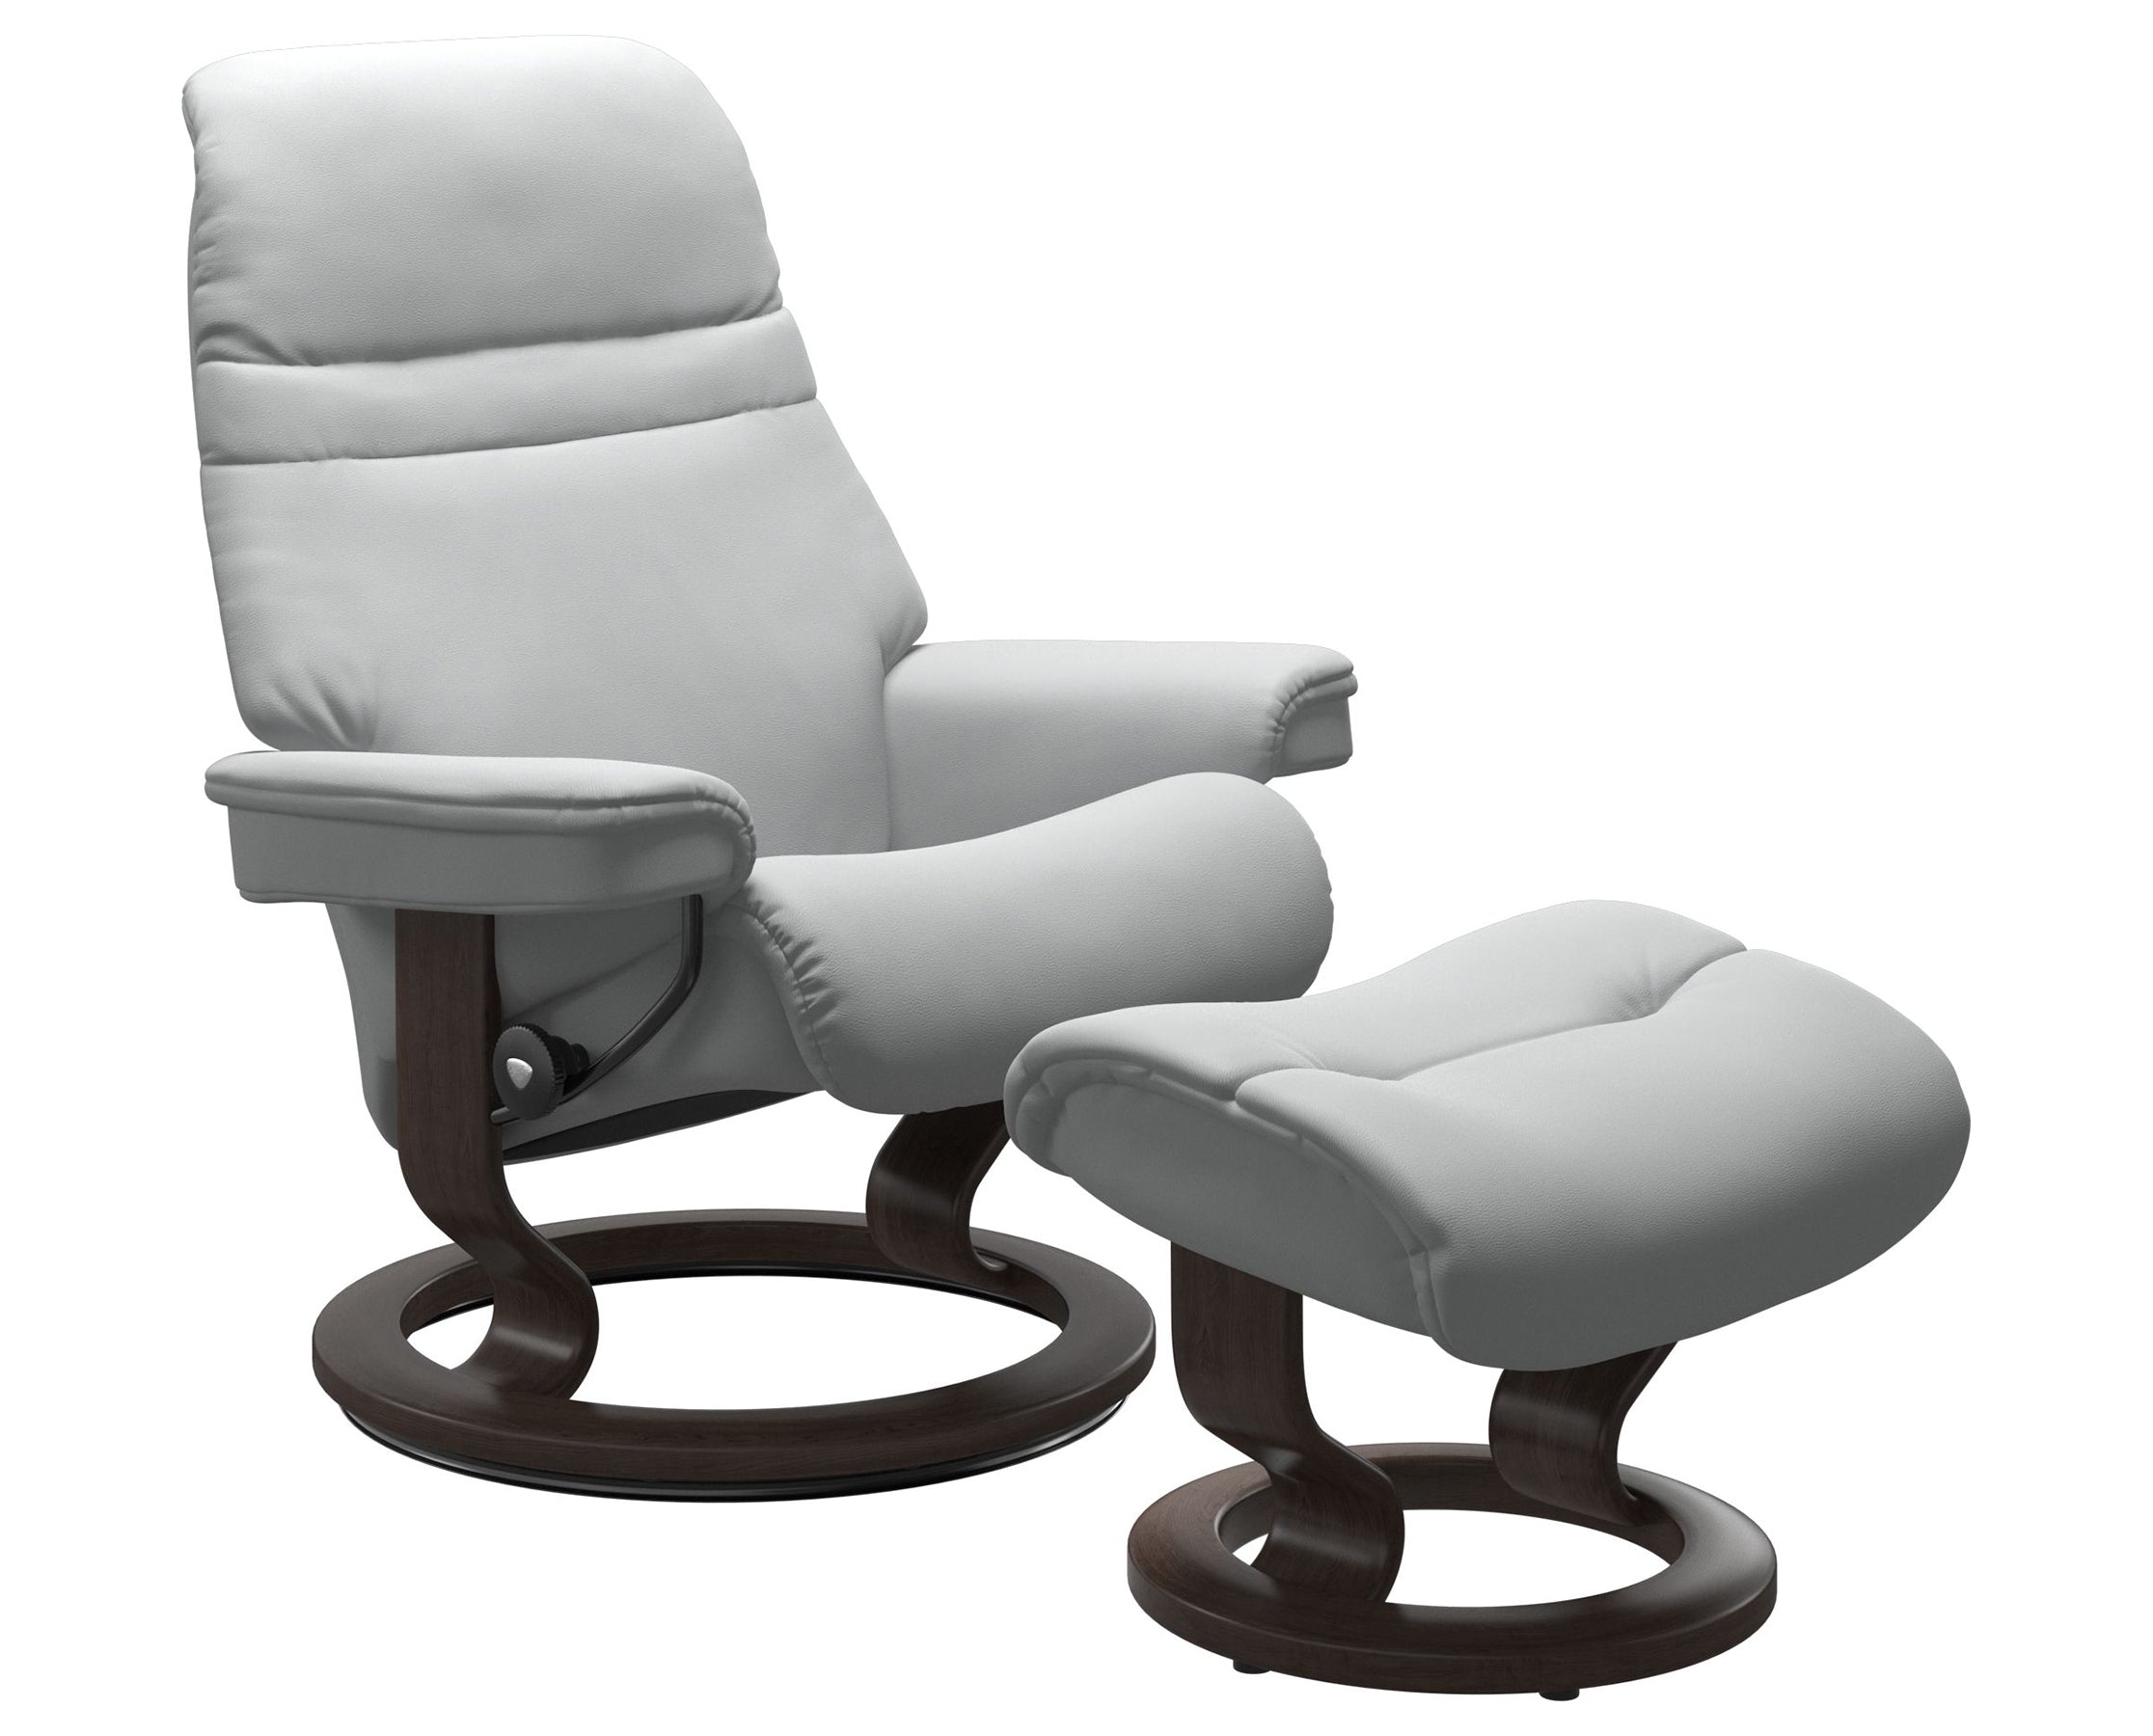 Paloma Leather Misty Grey S/M/L and Wenge Base | Stressless Sunrise Classic Recliner | Valley Ridge Furniture